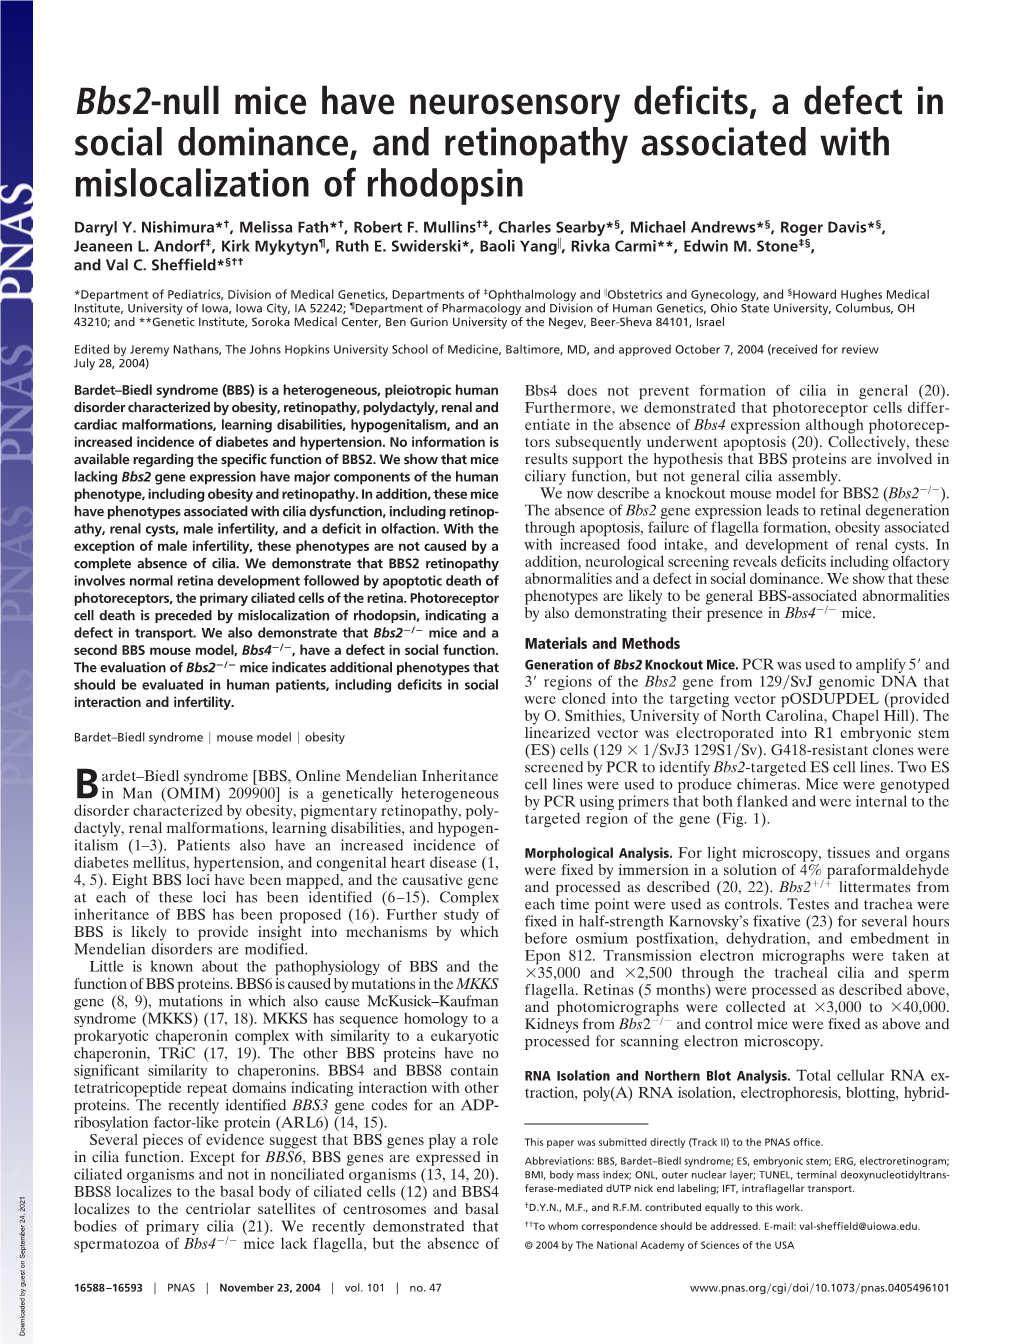 Bbs2-Null Mice Have Neurosensory Deficits, a Defect in Social Dominance, and Retinopathy Associated with Mislocalization of Rhodopsin